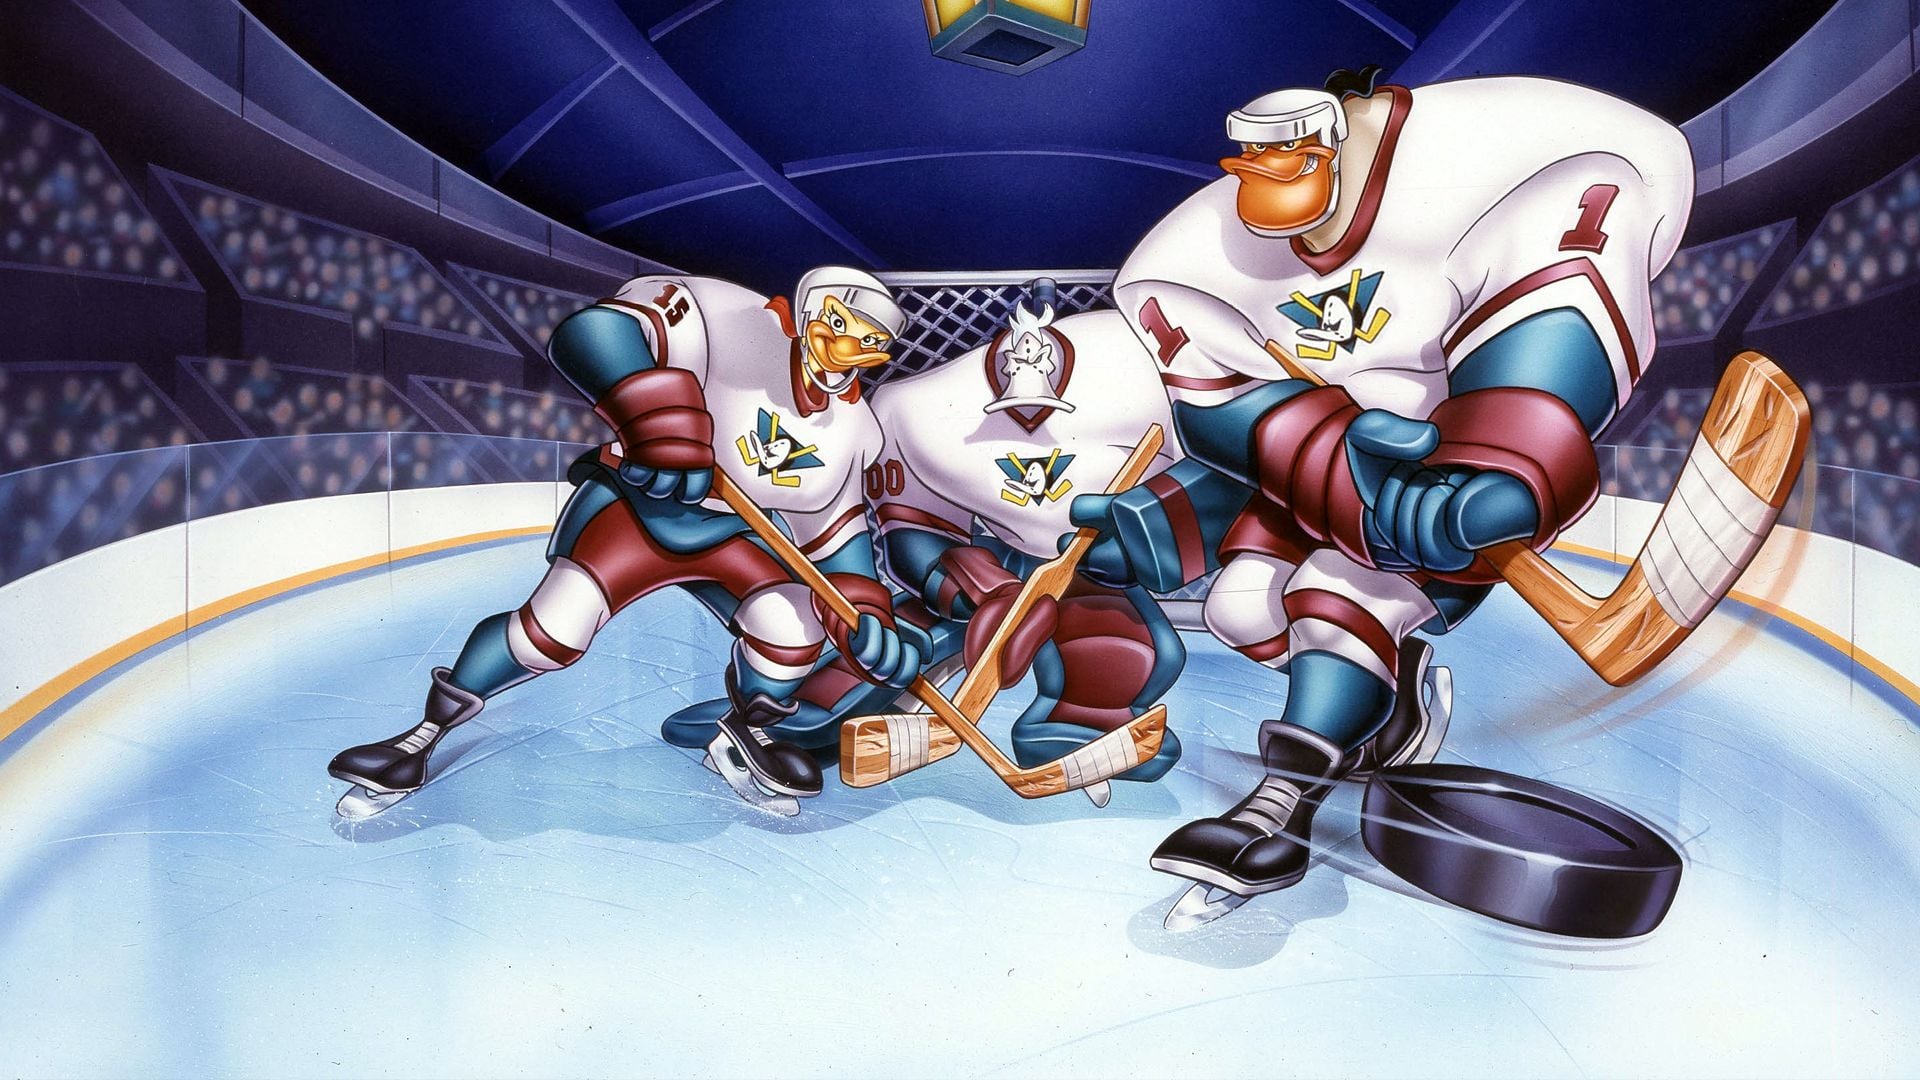 Old School Cool - Mighty Ducks: The Animated Series 